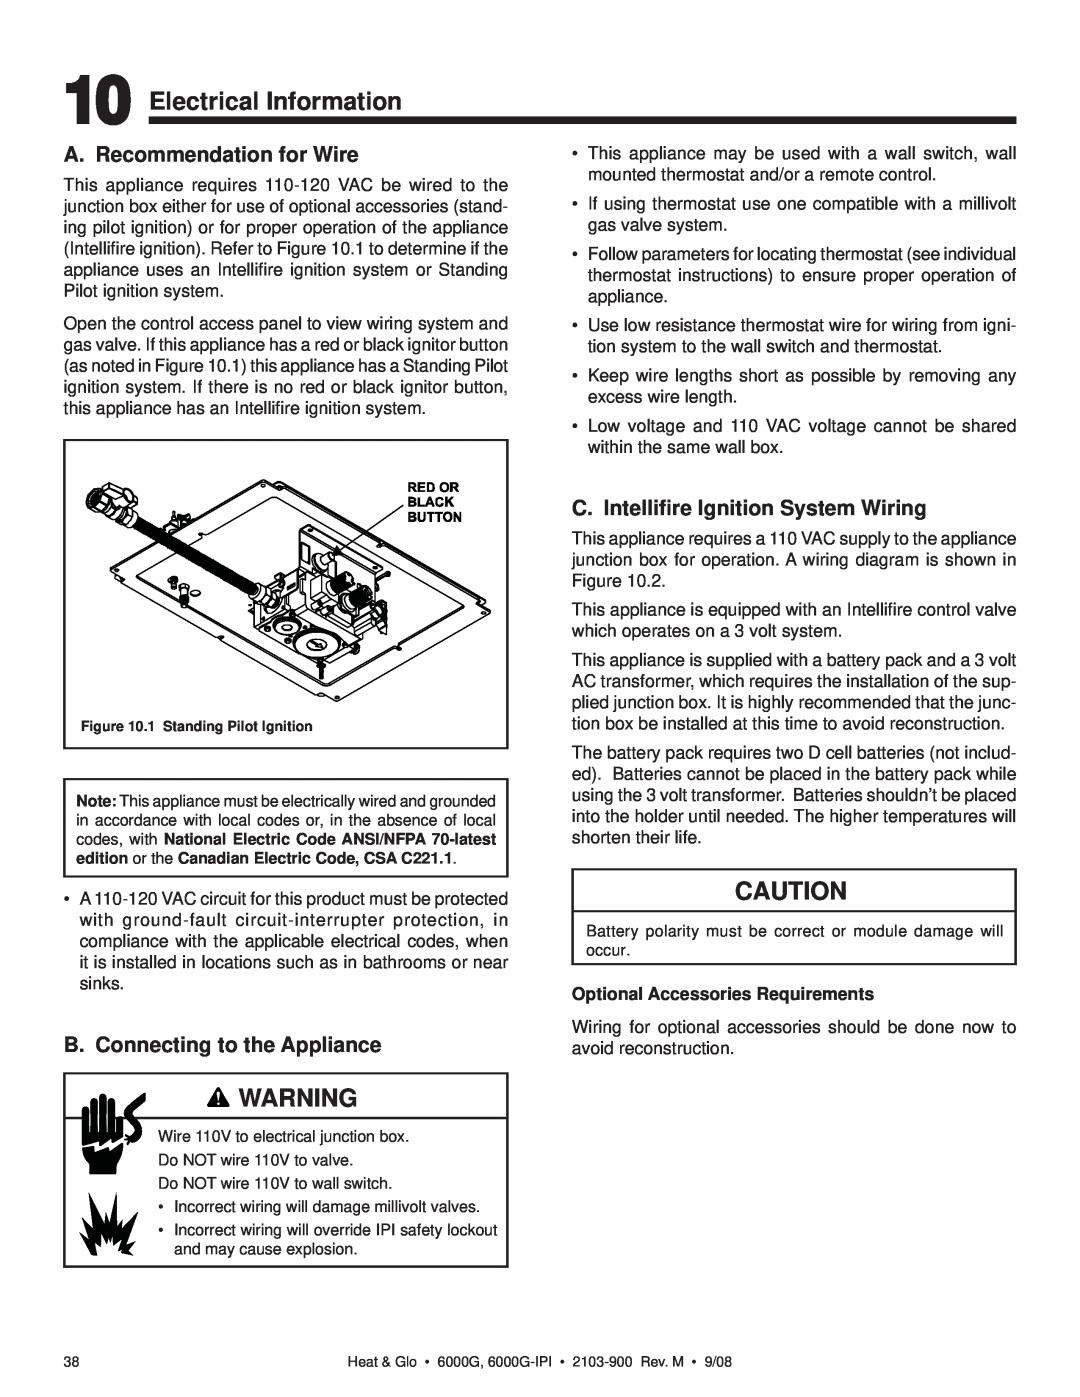 Heat & Glo LifeStyle 6000G-IPI Electrical Information, A. Recommendation for Wire, C. Intelliﬁre Ignition System Wiring 